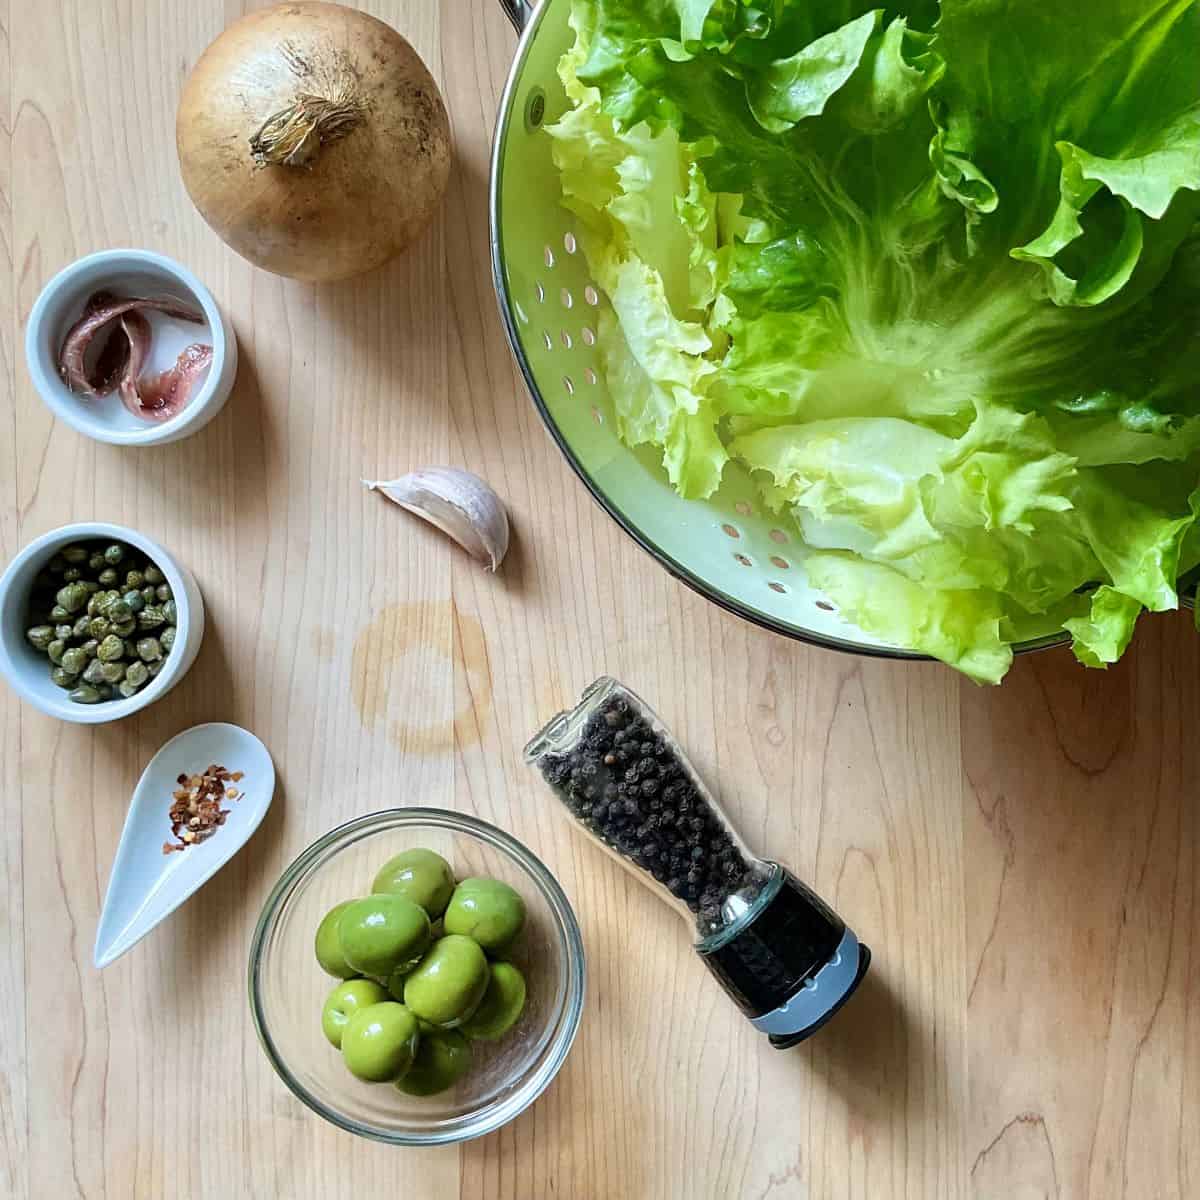 Ingredients to make pizza with escarole.